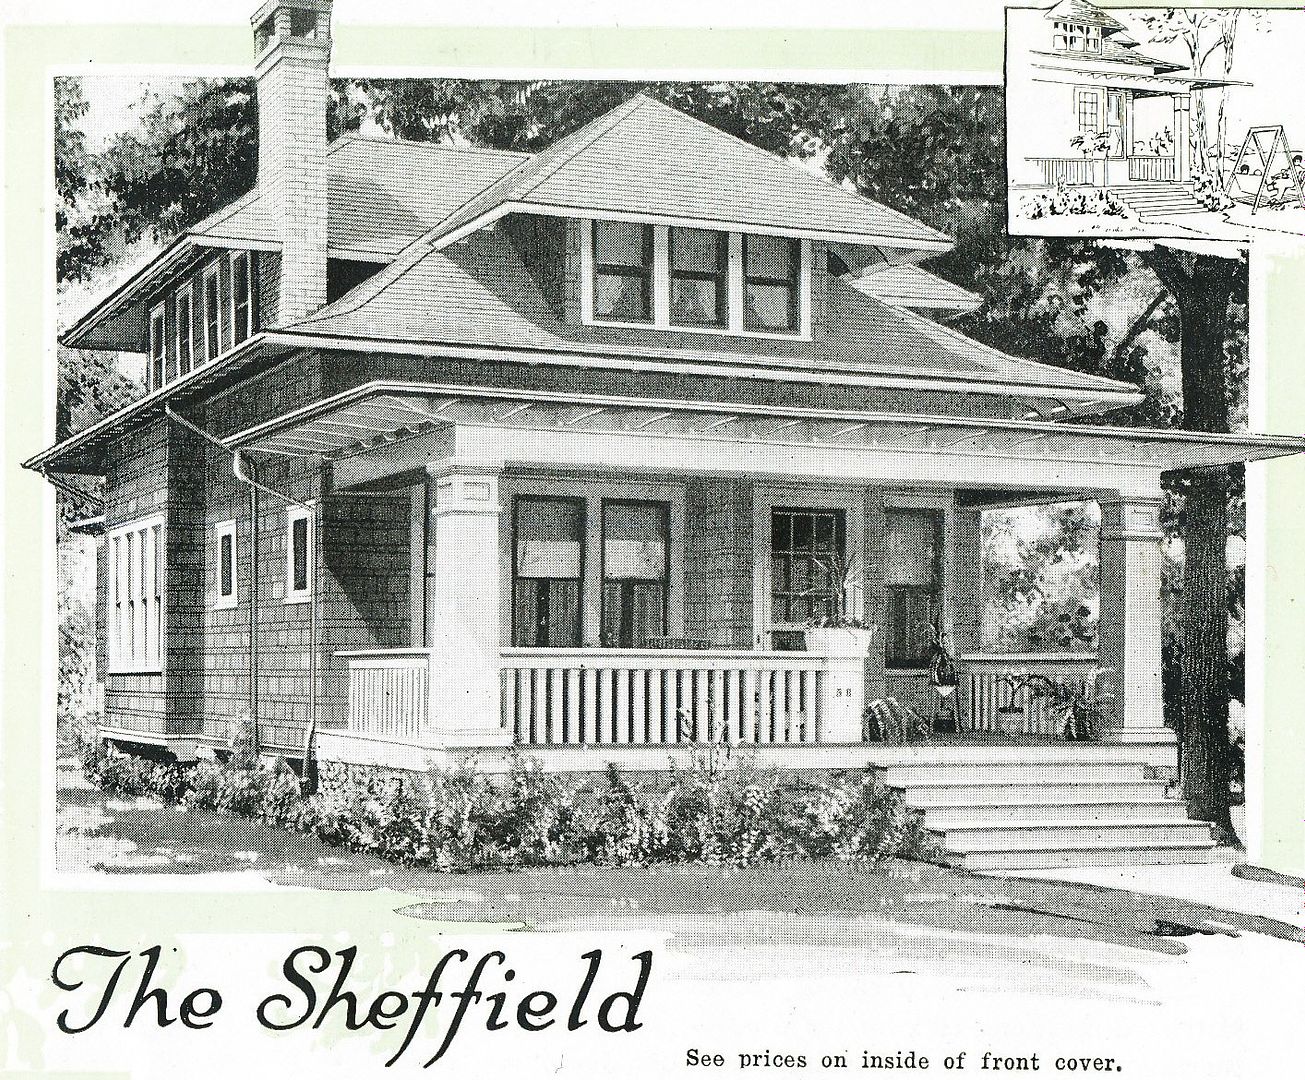 Aladdin Sheffield, as seen in the 1919 Aladdin catalog. This is an interesting house with its dramatic oversized eaves and hooded dormers. 